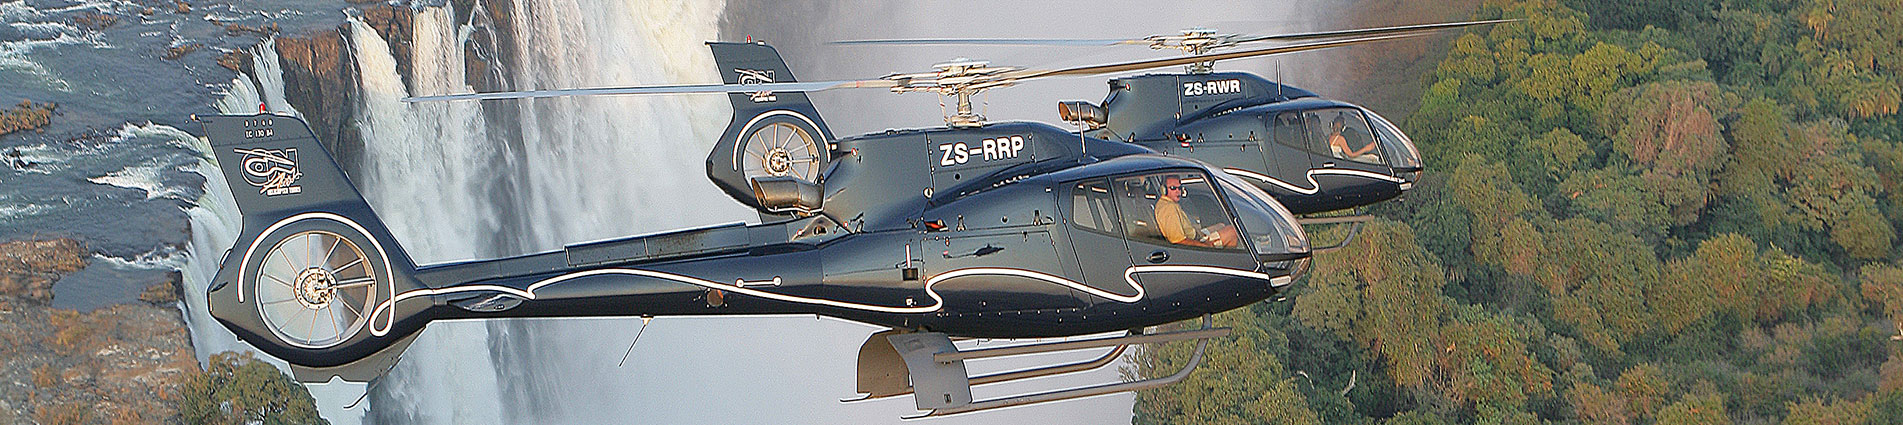 Two Eurocopter EC 130B4 Helicopters | Tech-Tool Plastics